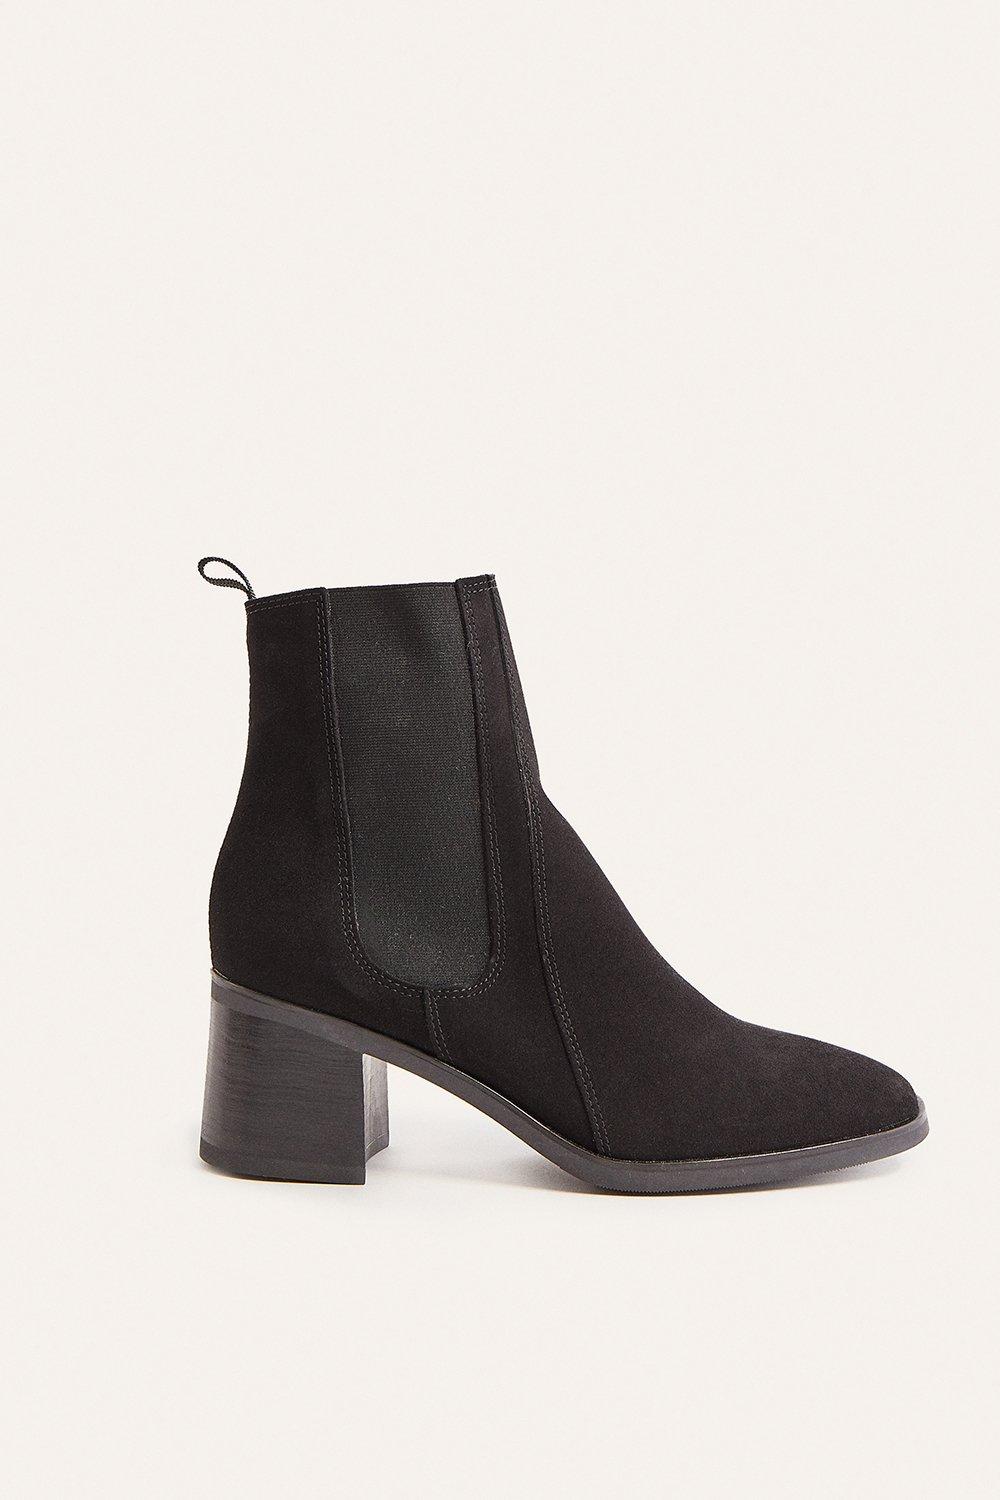 oasis black suede ankle boots